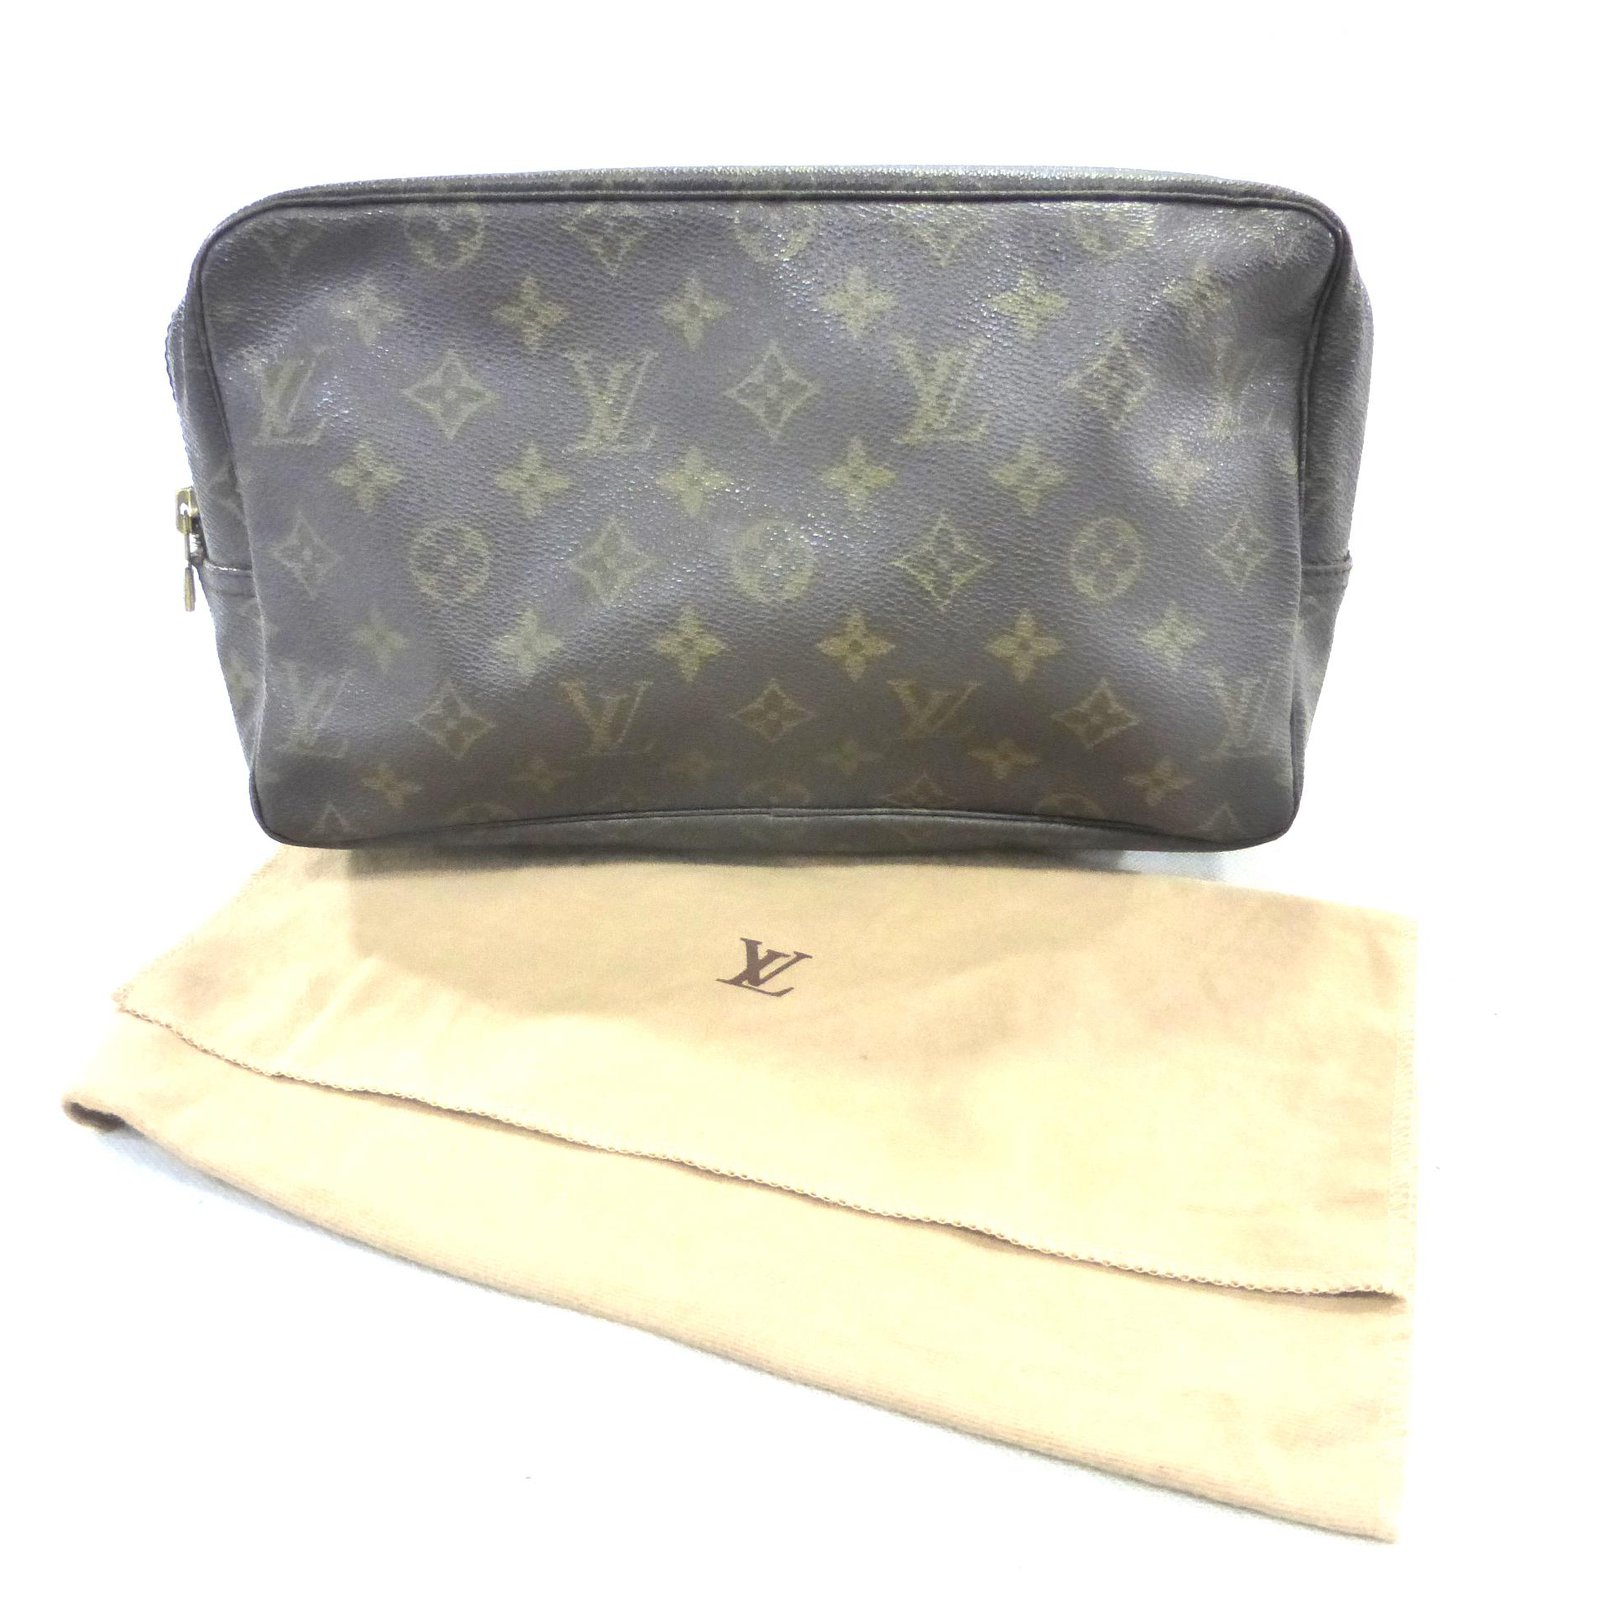 What Is The Perfect Louis Vuitton Wallet For A Modern Woman